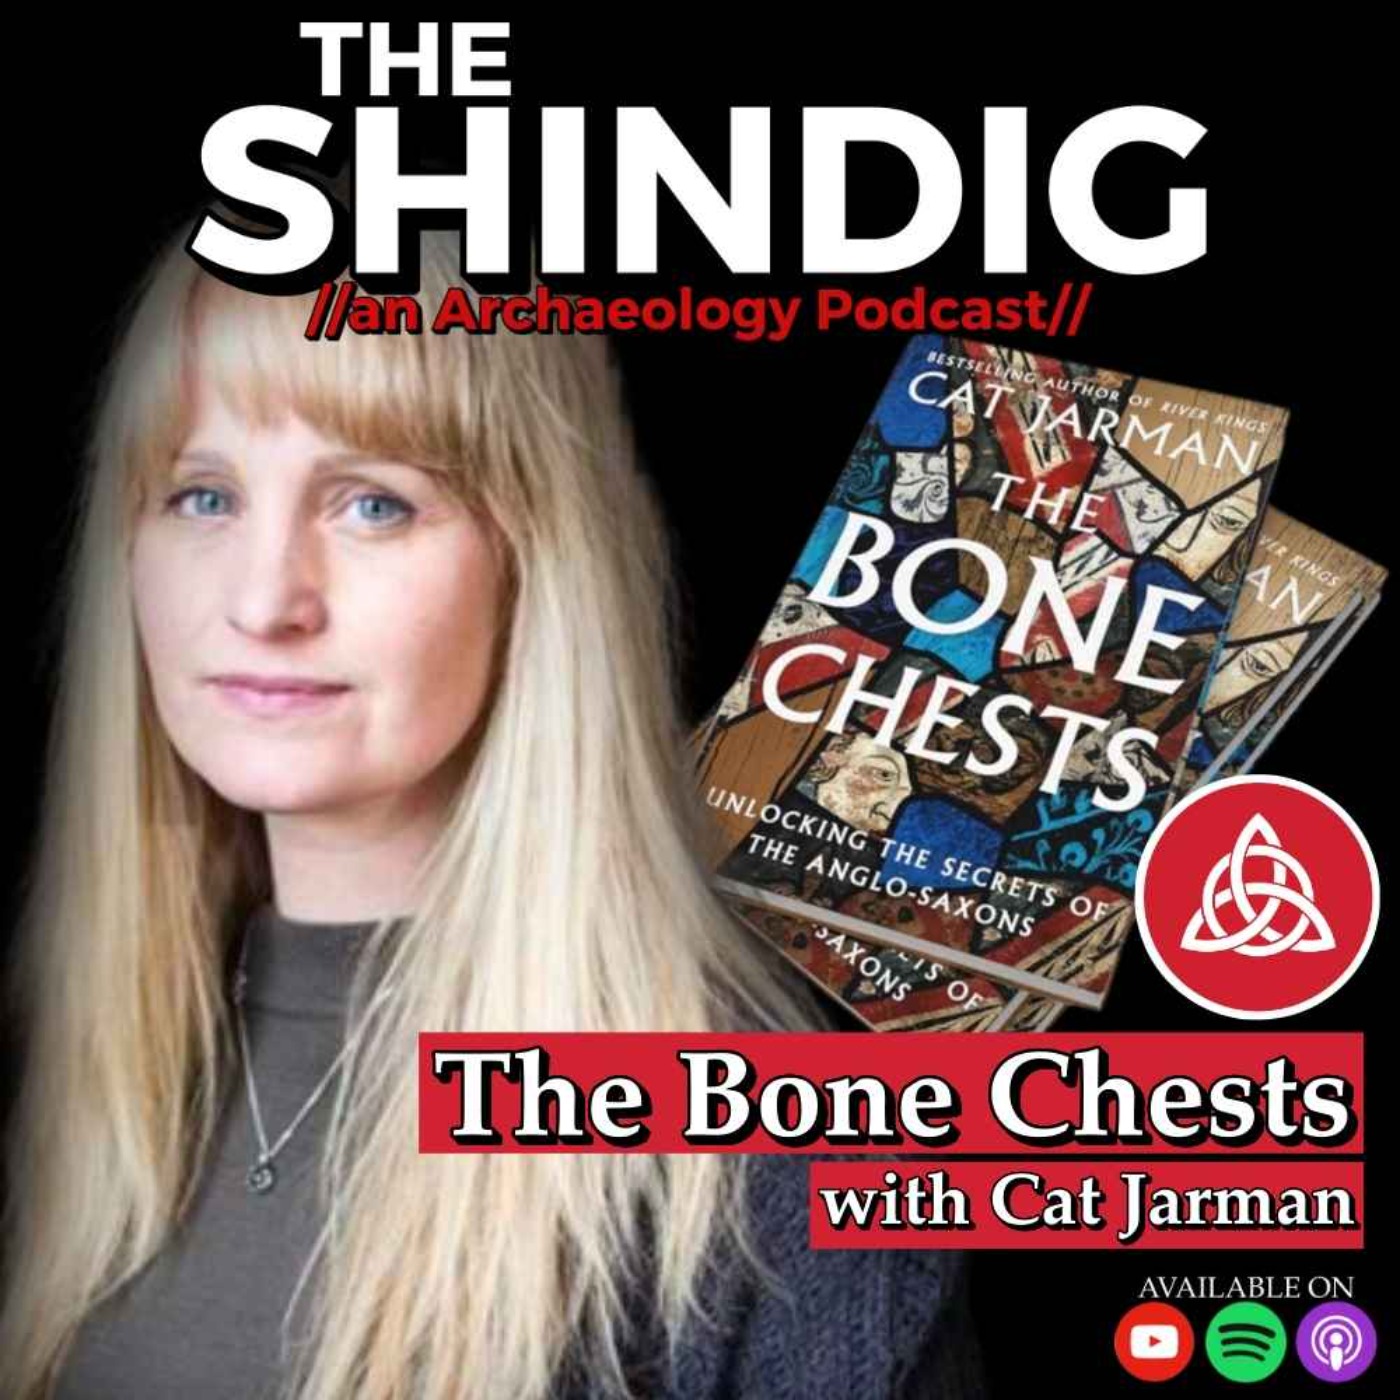 The Bone Chests – With Dr. Cat Jarman